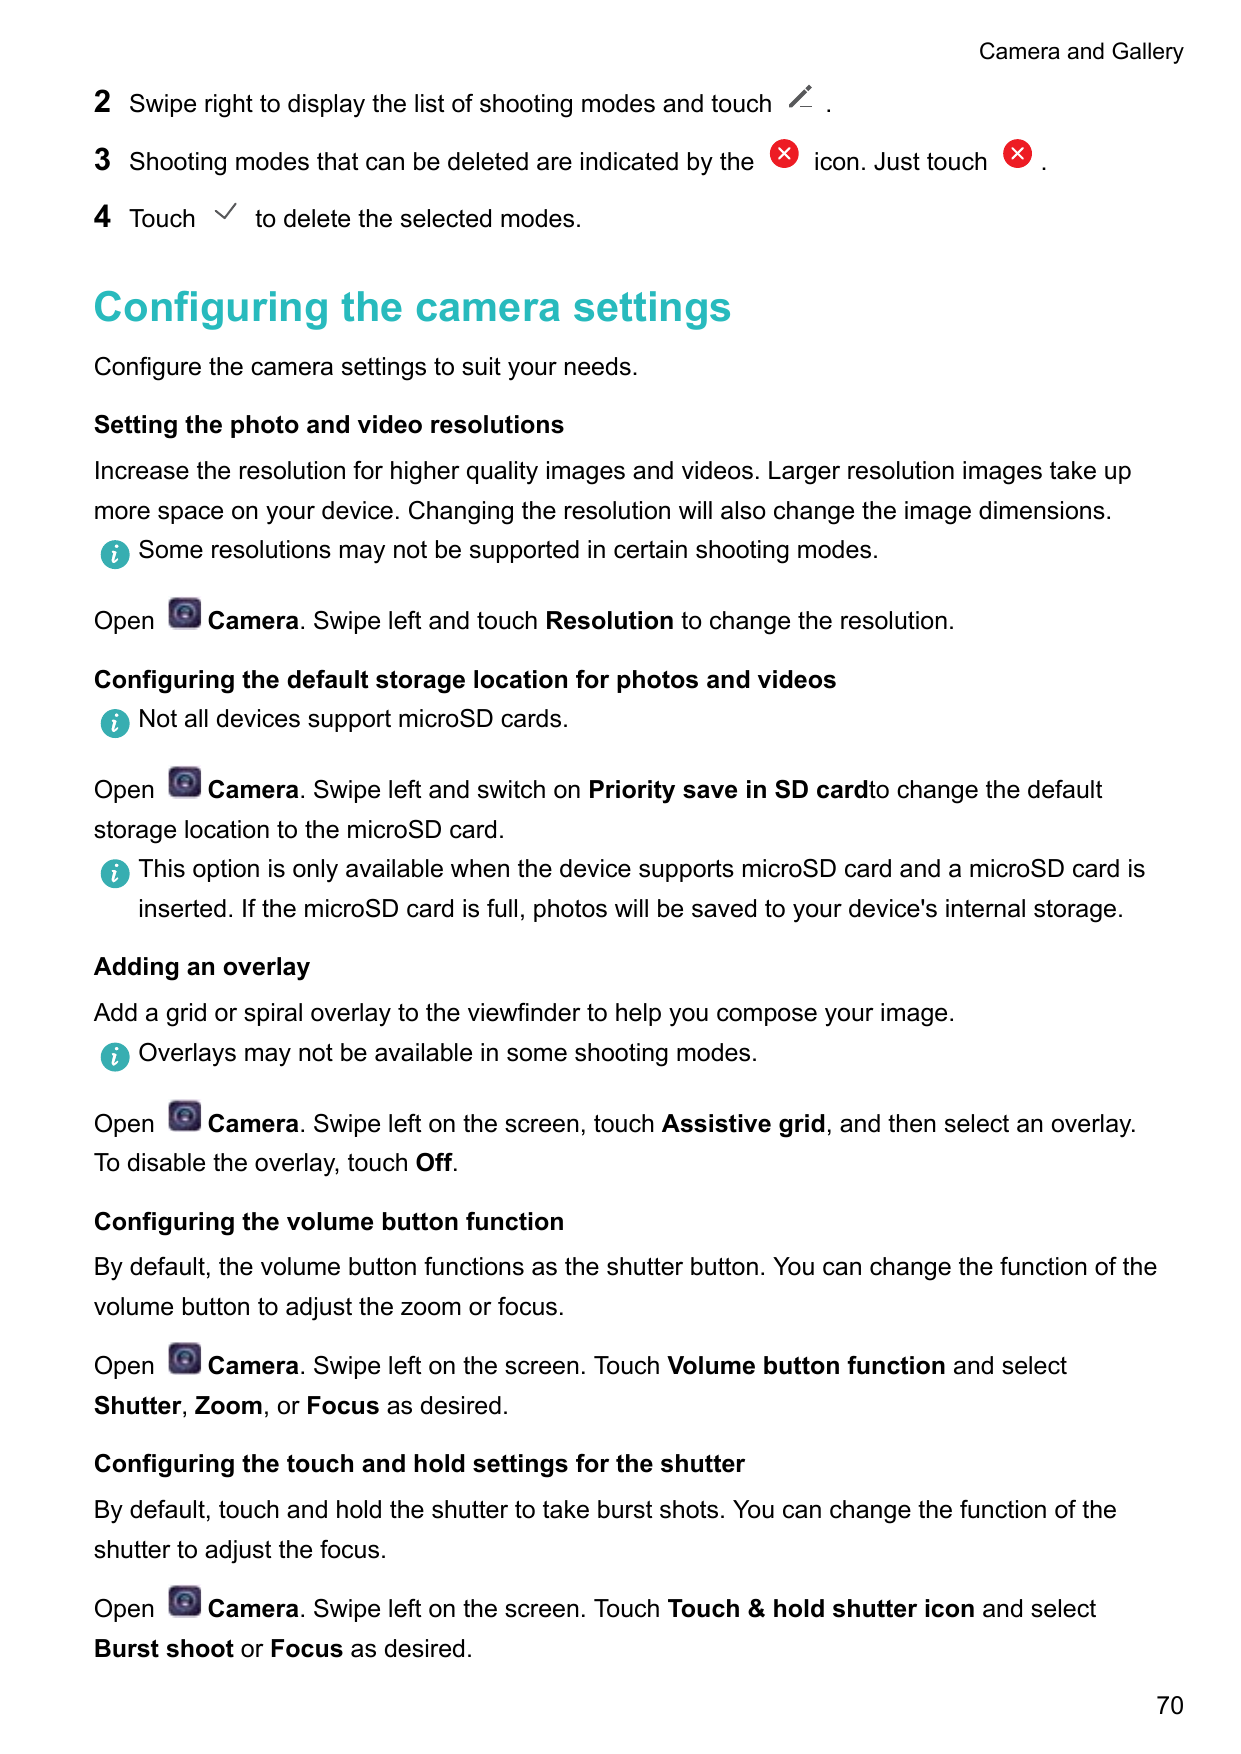 Camera and Gallery2Swipe right to display the list of shooting modes and touch3Shooting modes that can be deleted are indicated 